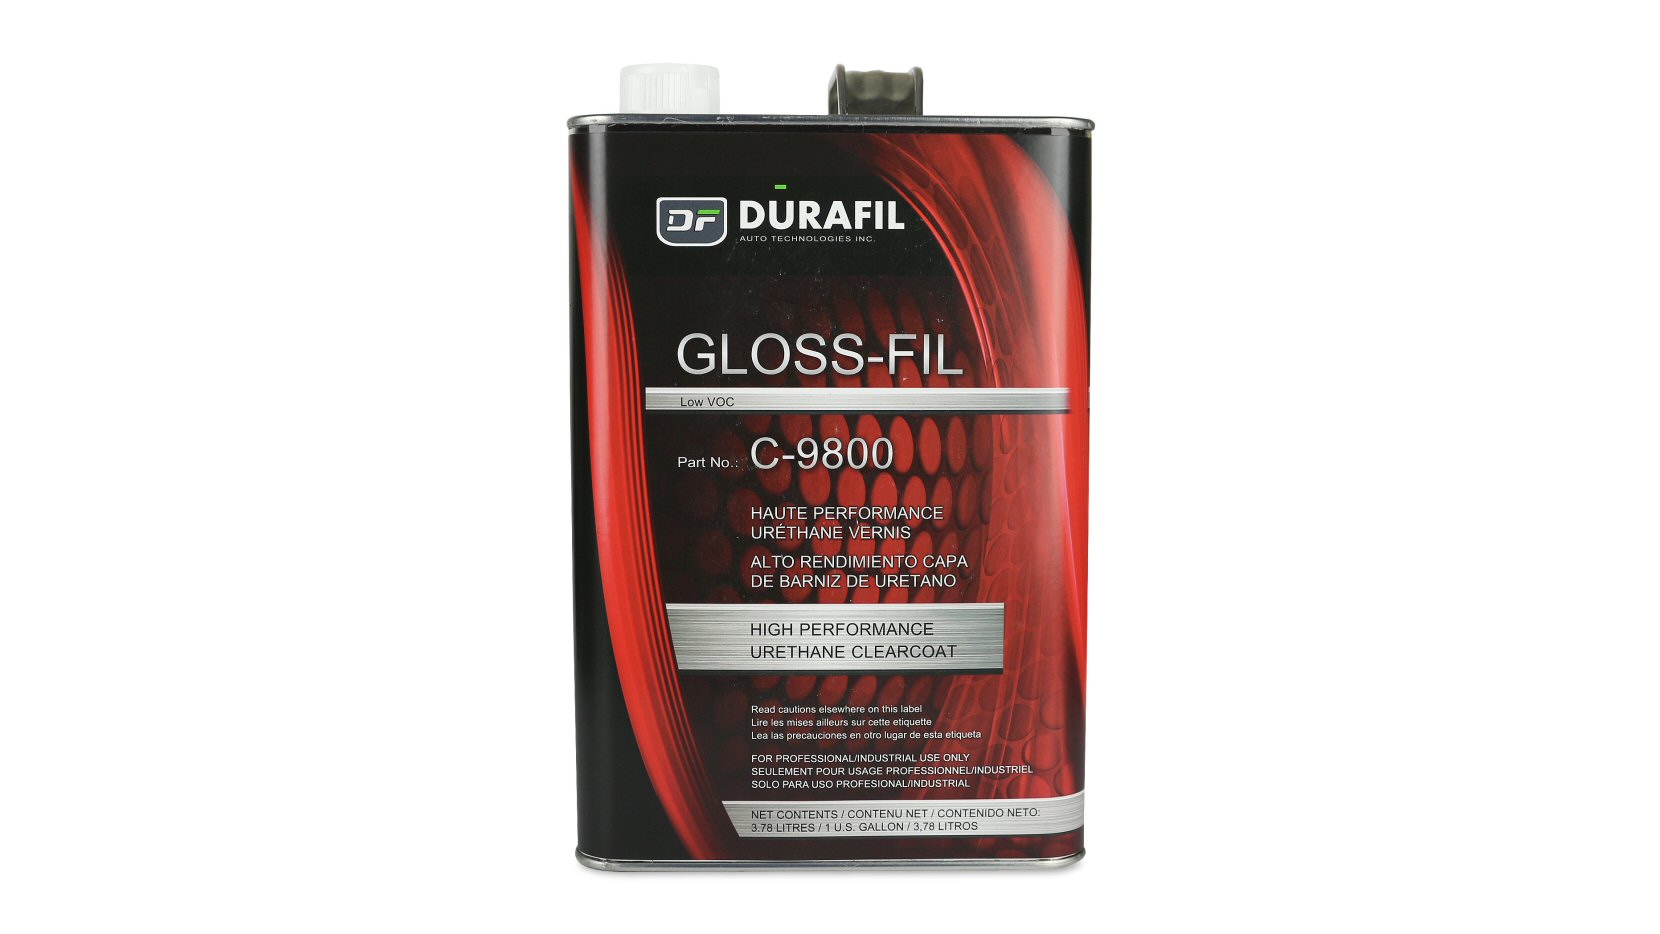 C-9800 Gloss-Fil Luxury Urethane Clearcoat 52% Solid – 1 Gallon